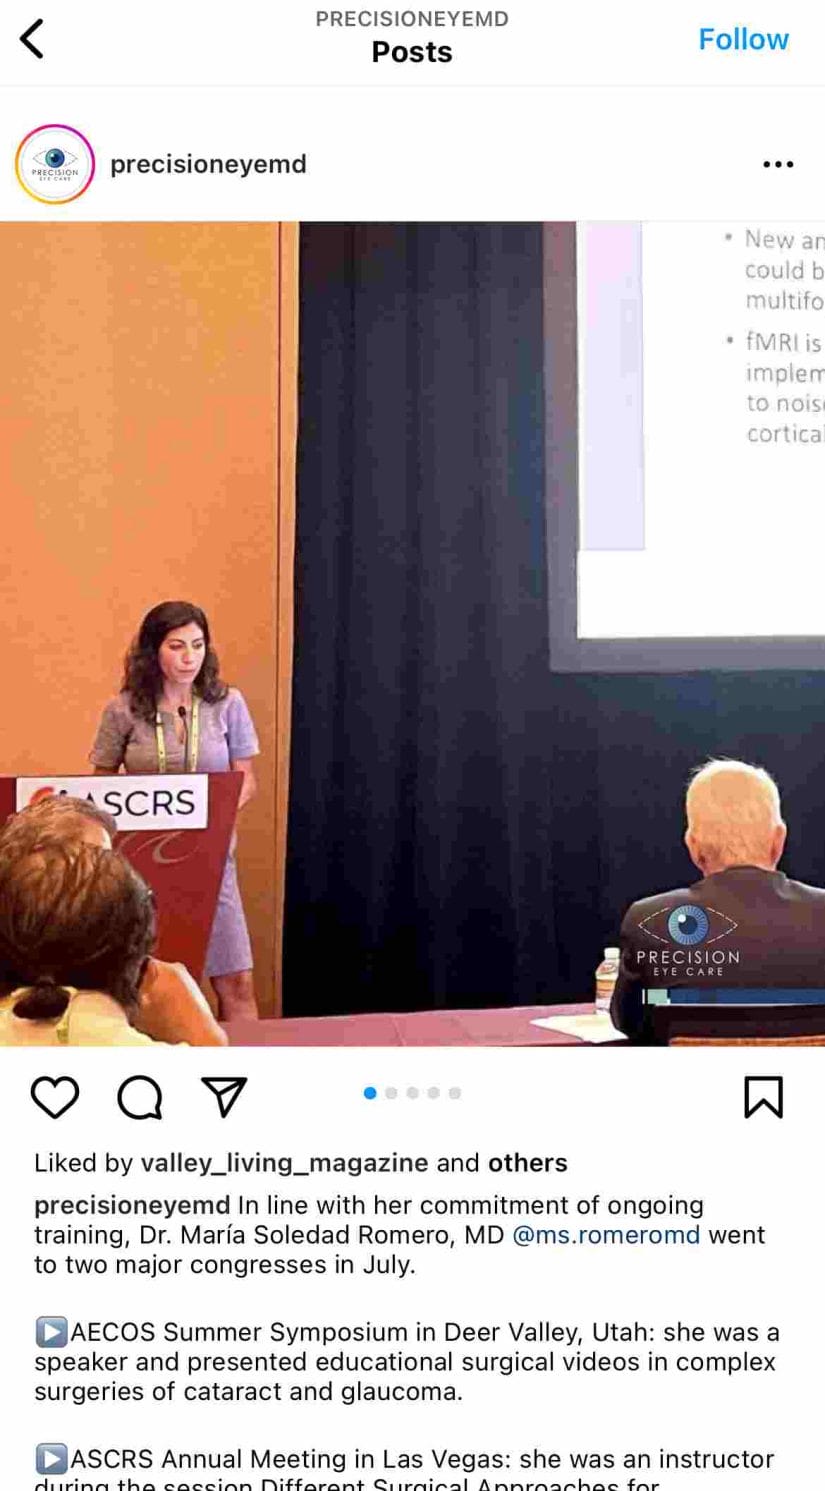 Instagram post of an optometrist attending a conference